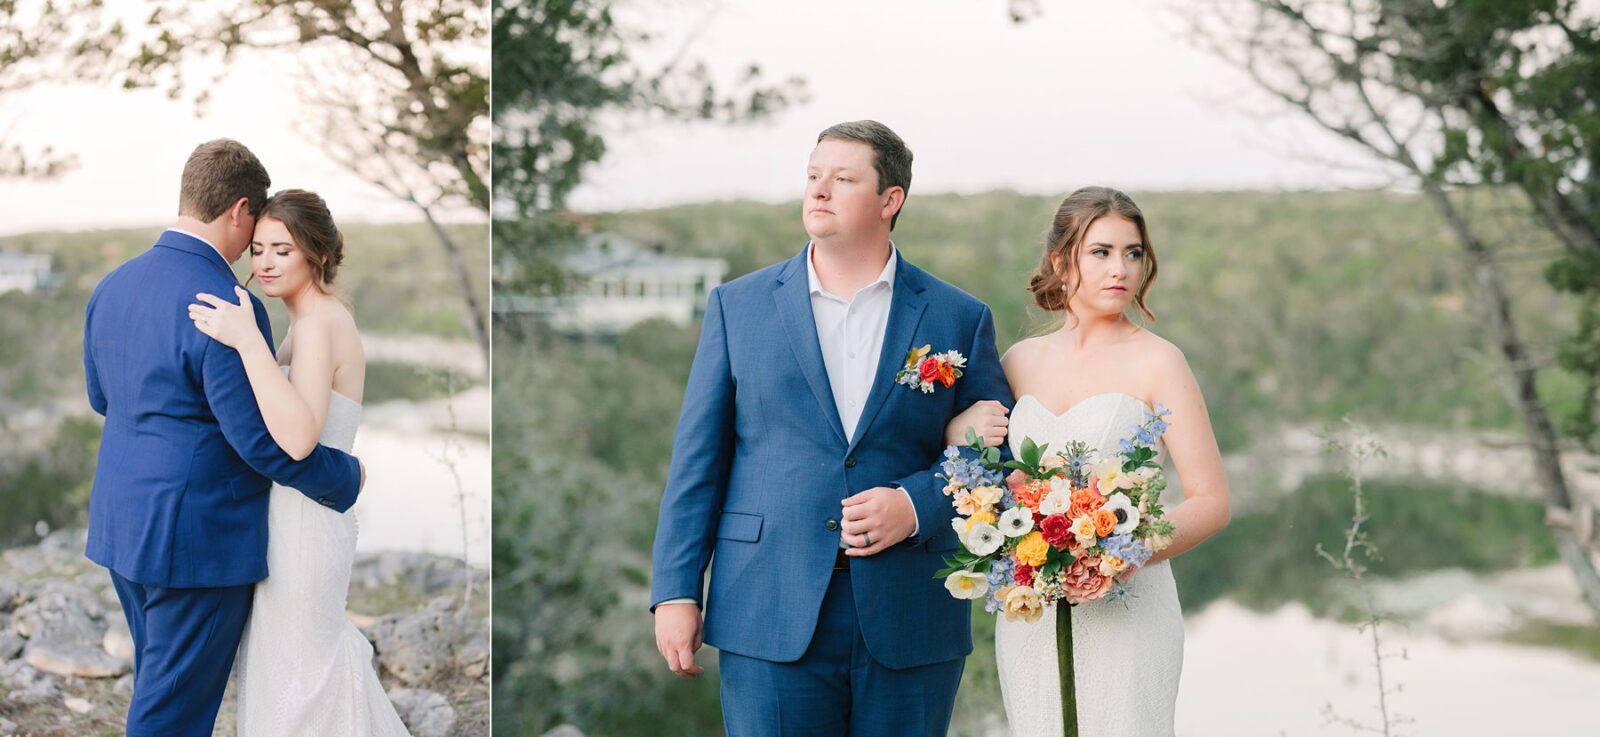 bride and groom portraits, cliffside overlook, lake overlook at the videre, wedding at the videre estate venue, wimberley, photos by Tara Lyons Photography, Perry's Petal, planning by sweet magnolia events